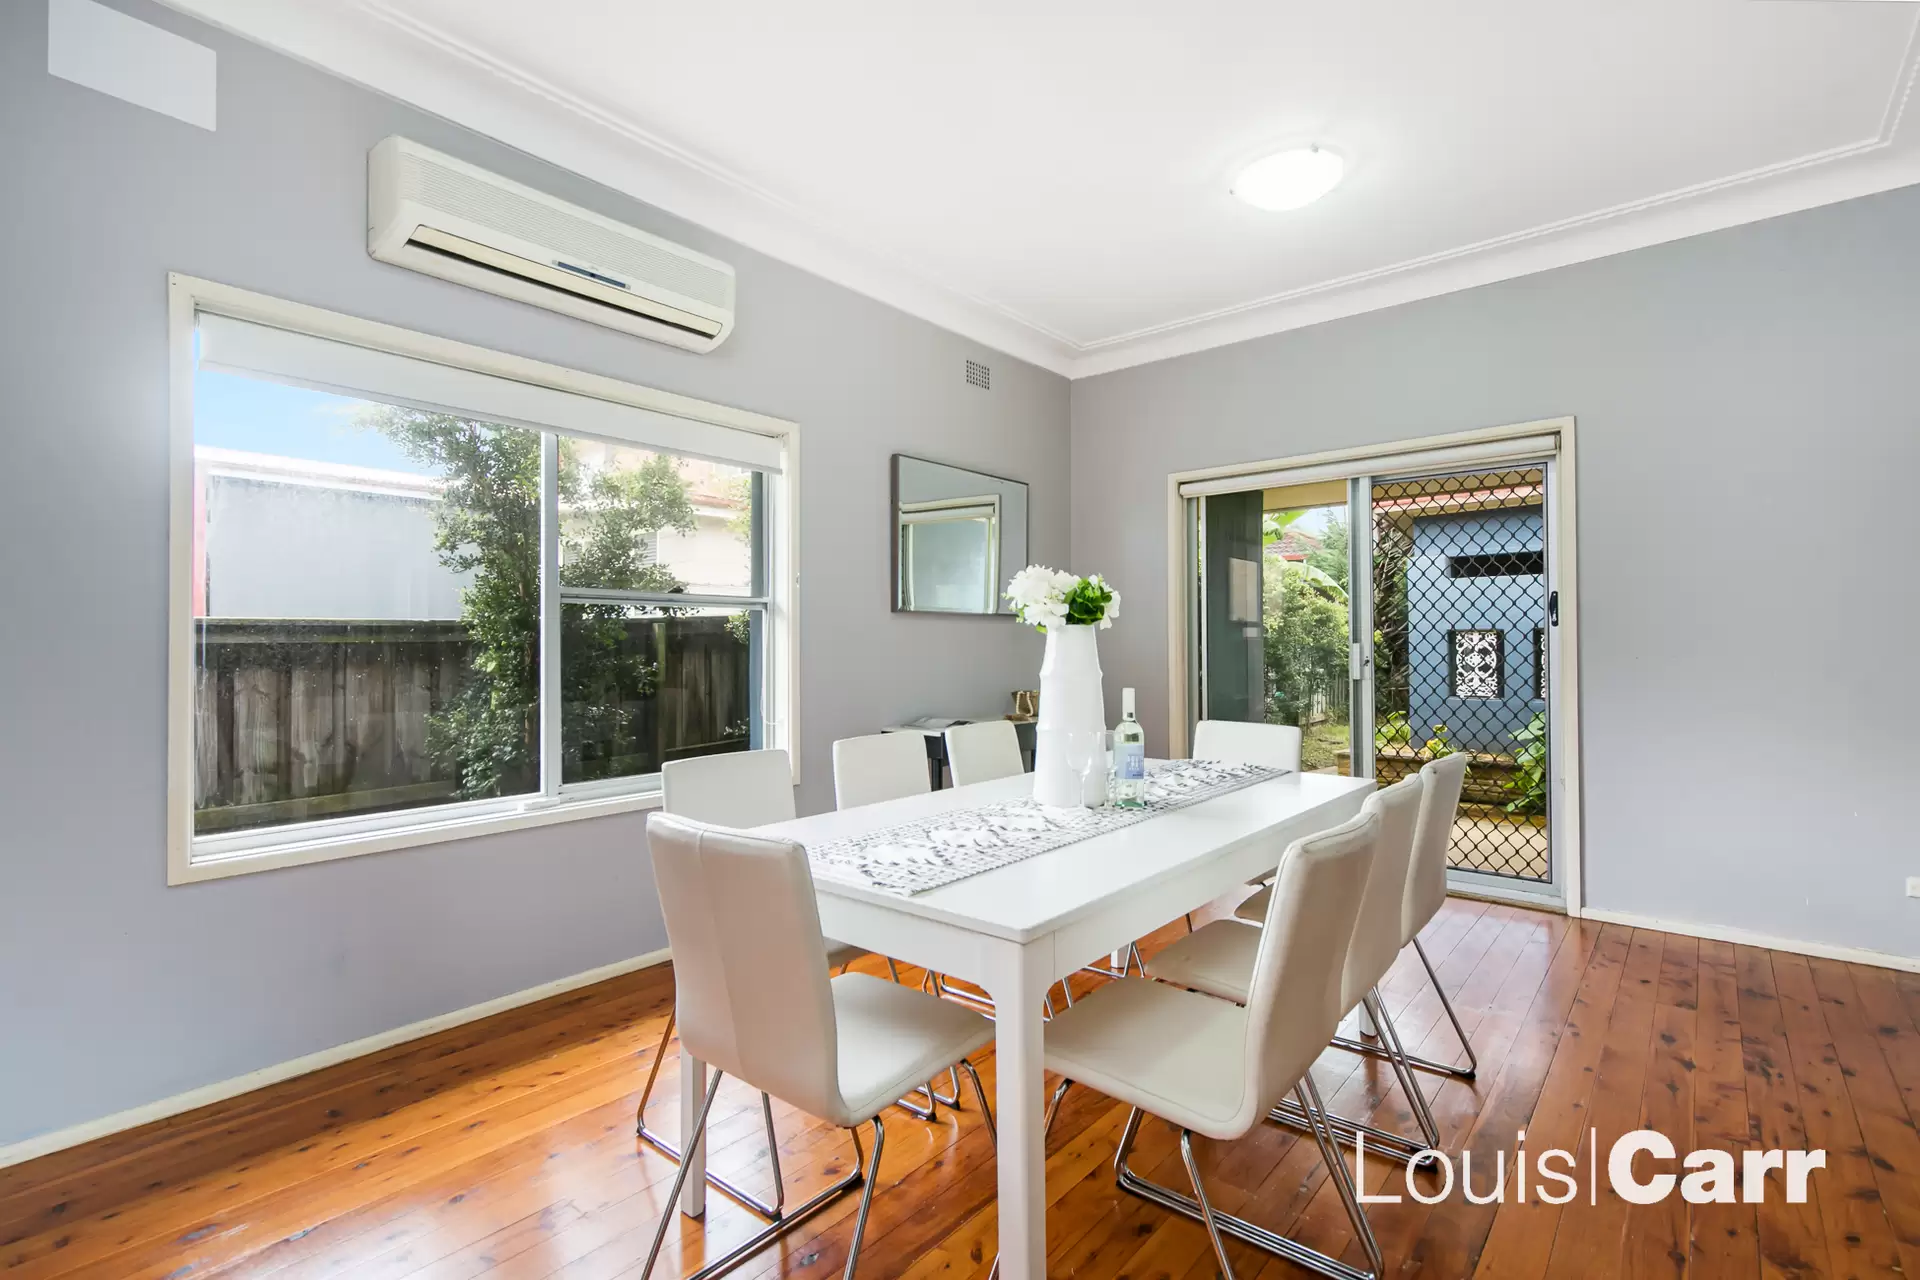 Photo #5: 17 Darlington Drive, Cherrybrook - Sold by Louis Carr Real Estate